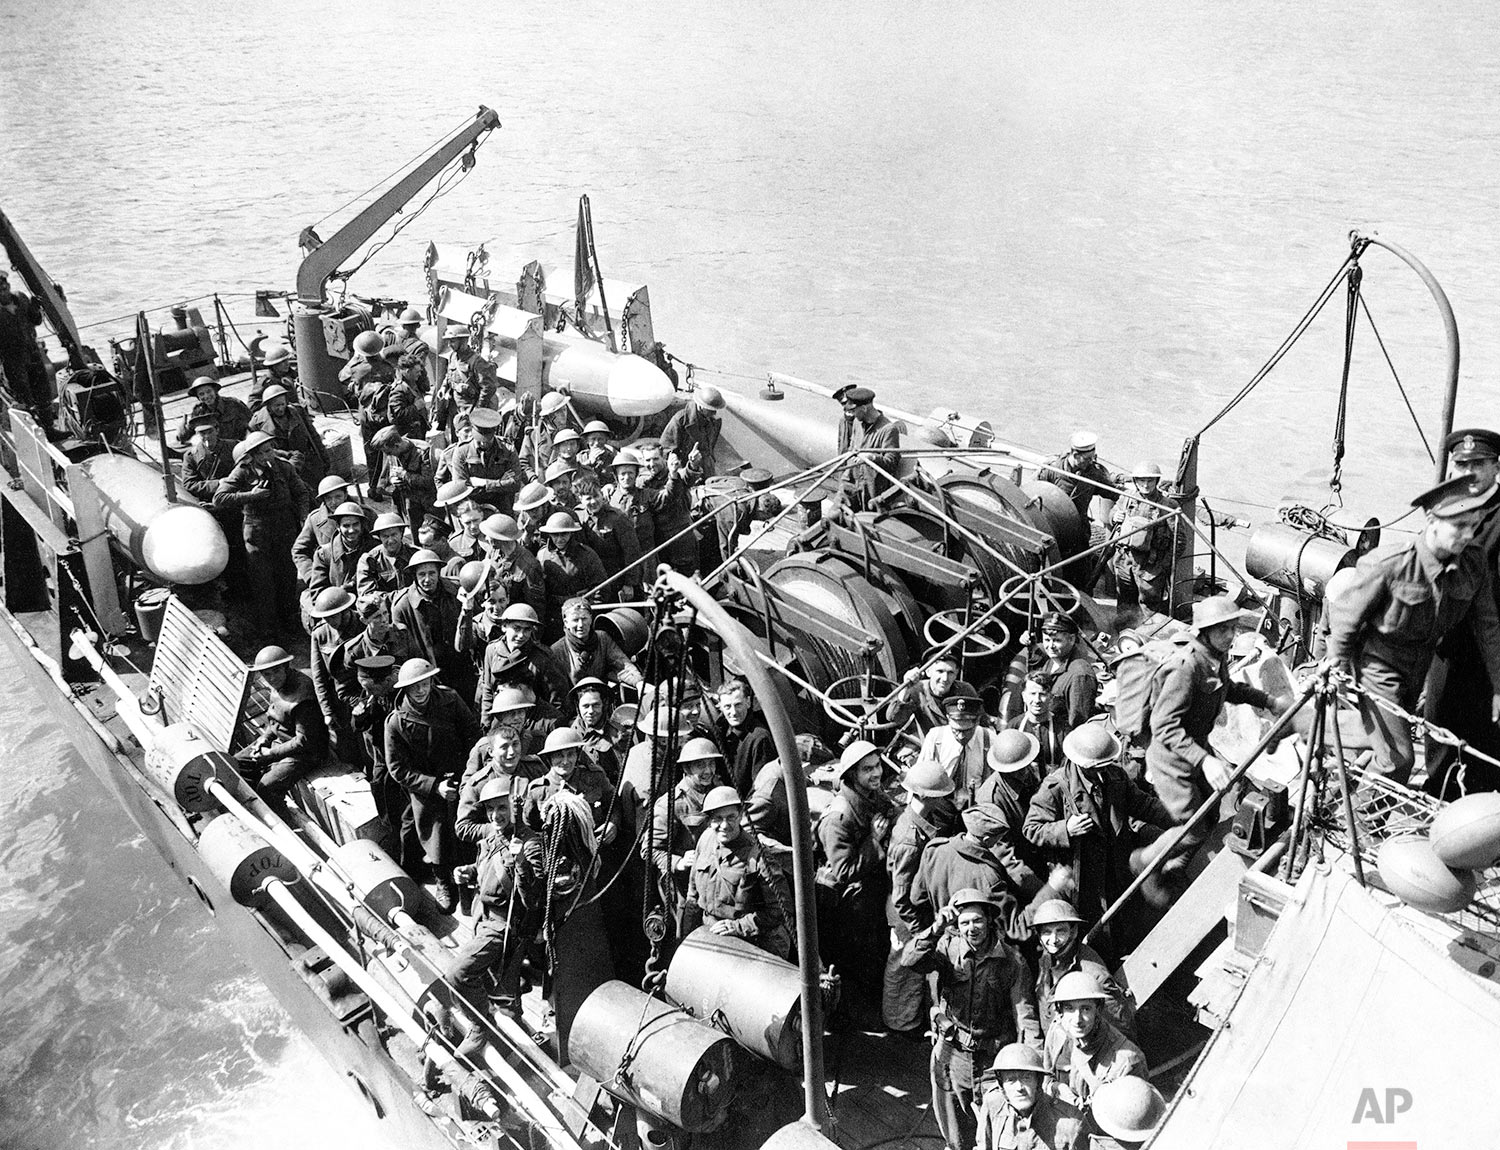  Troops of the British Expeditionary Force landing at an English port on May 31, 1940. (AP Photo) 